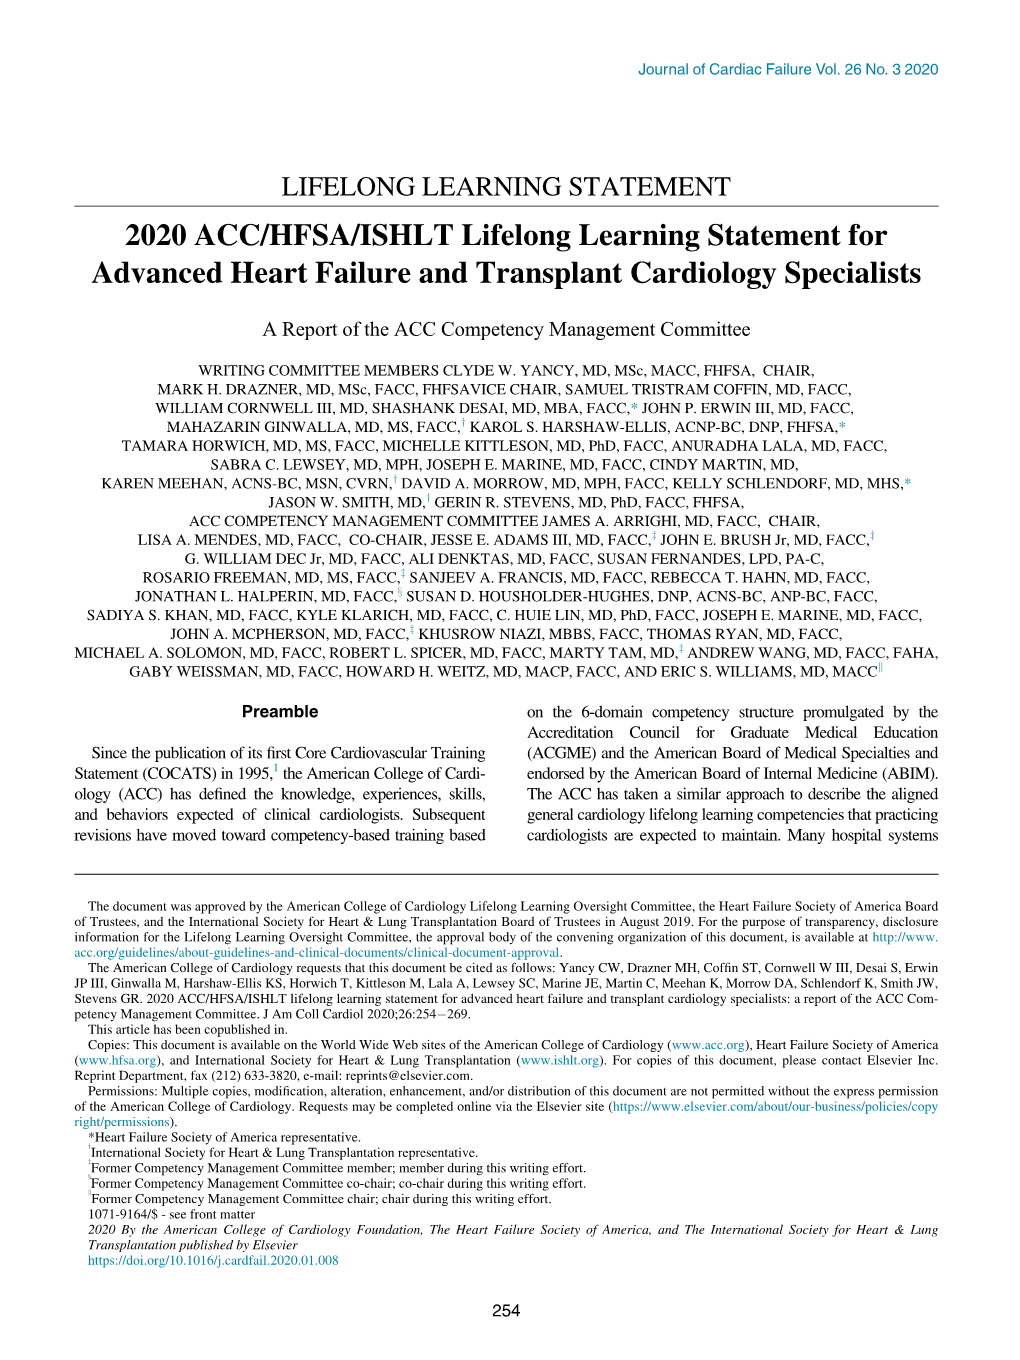 2020 ACC/HFSA/ISHLT Lifelong Learning Statement for Advanced Heart Failure and Transplant Cardiology Specialists